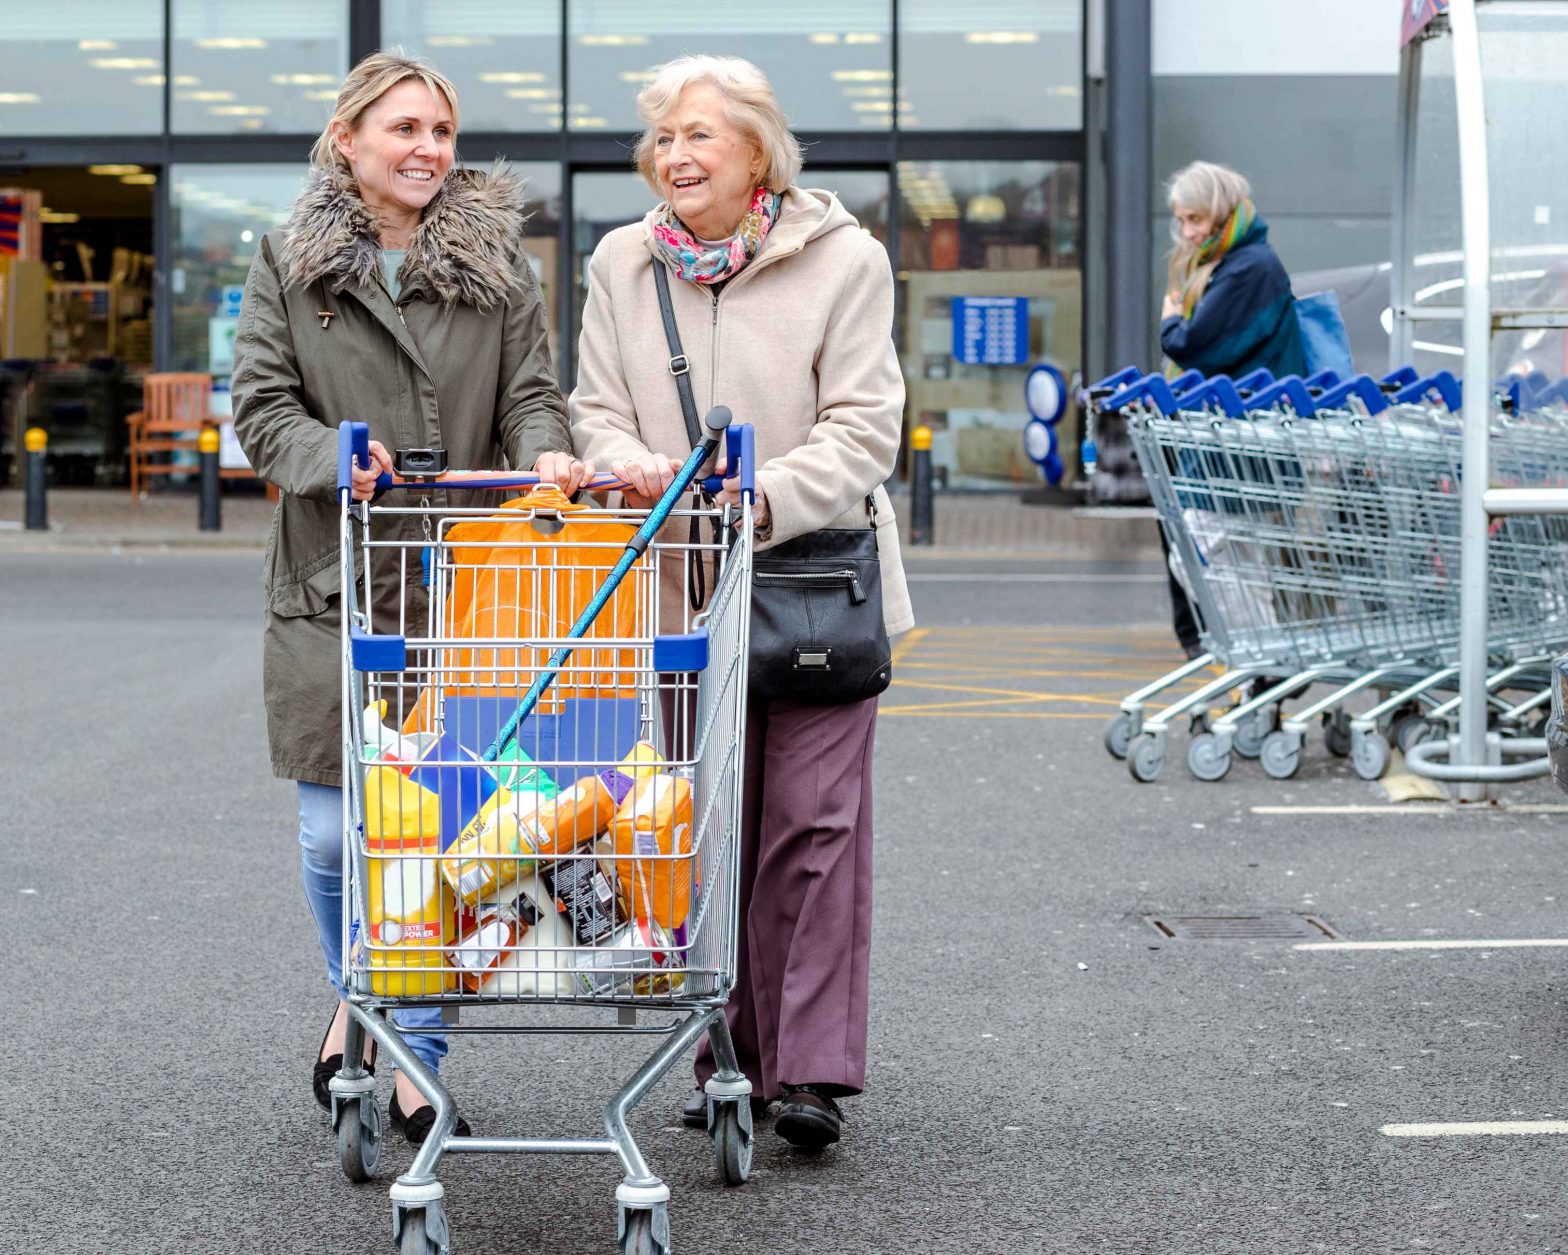 Aged person and support worker pushing shopping cart in carpark